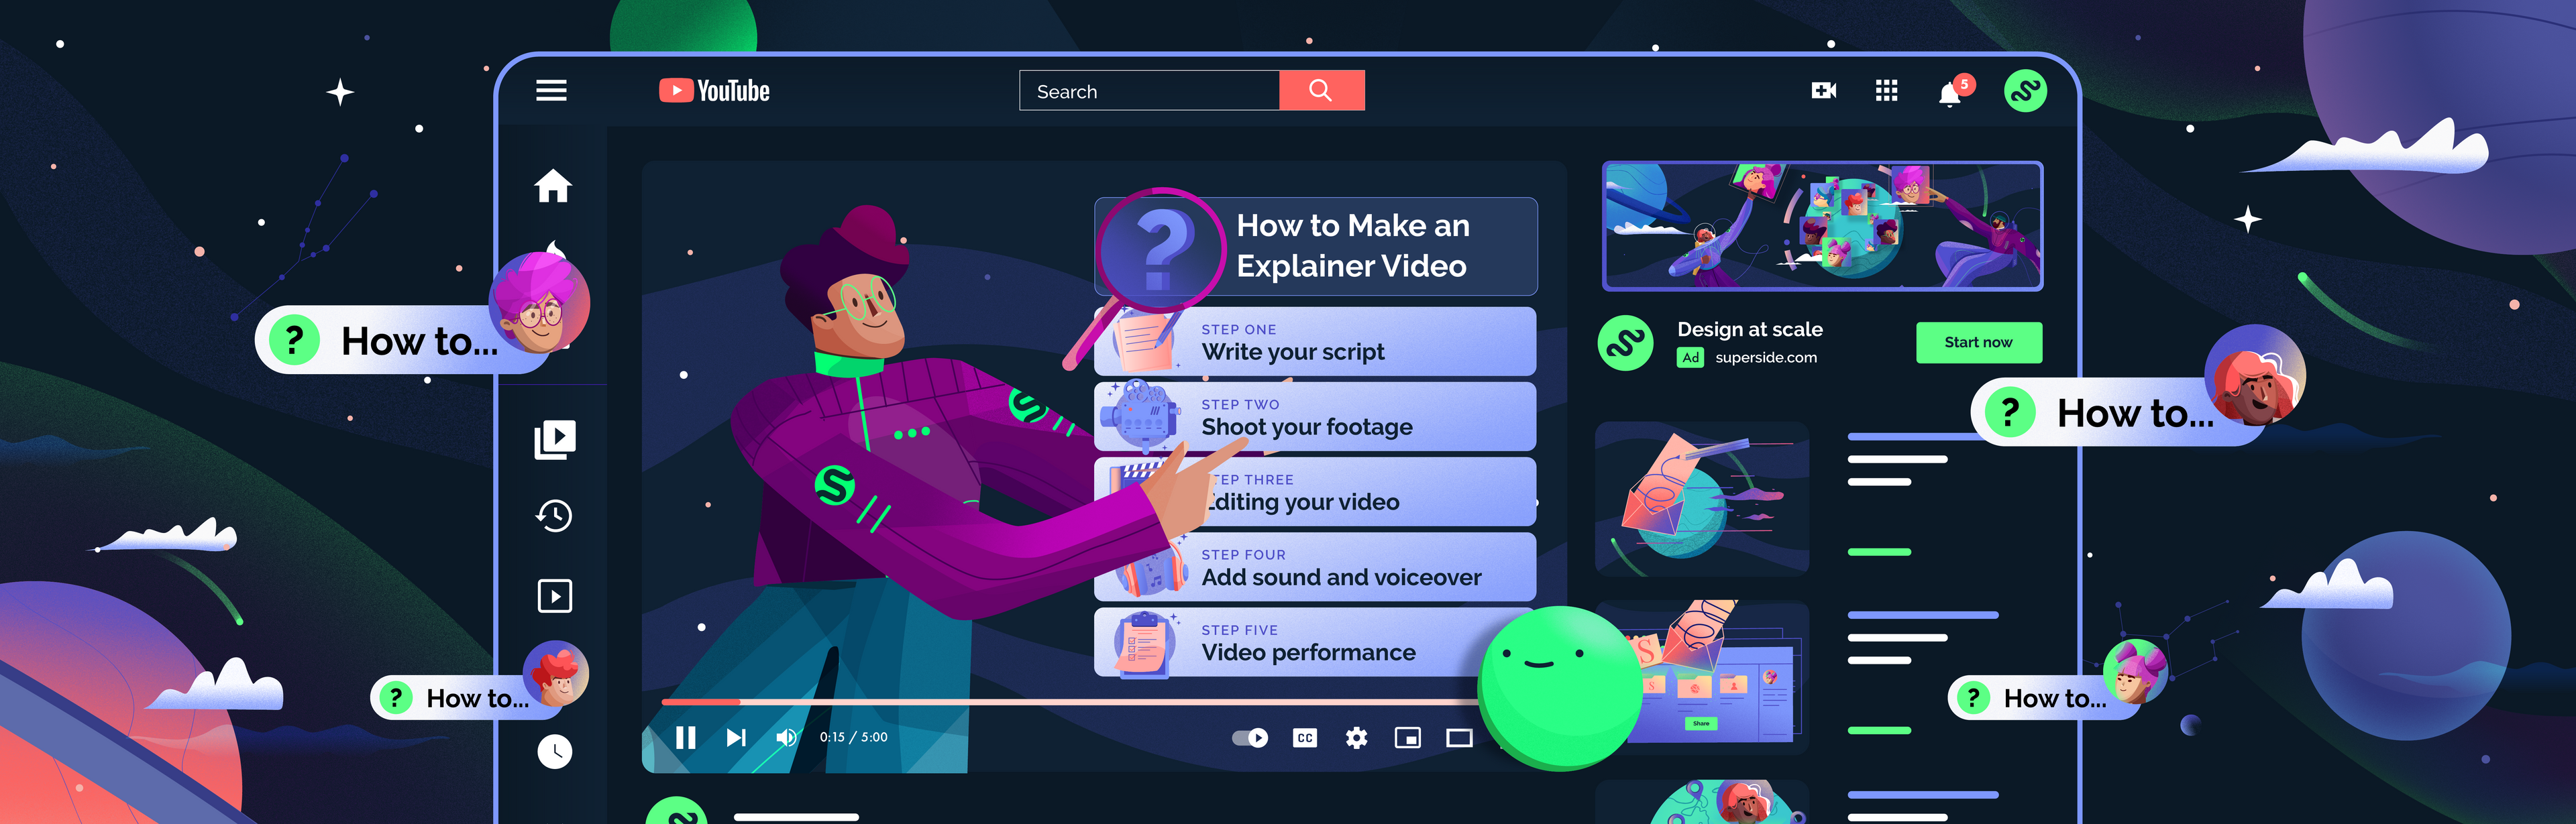 The Secrets to Excelling with Explainer Videos - Superside